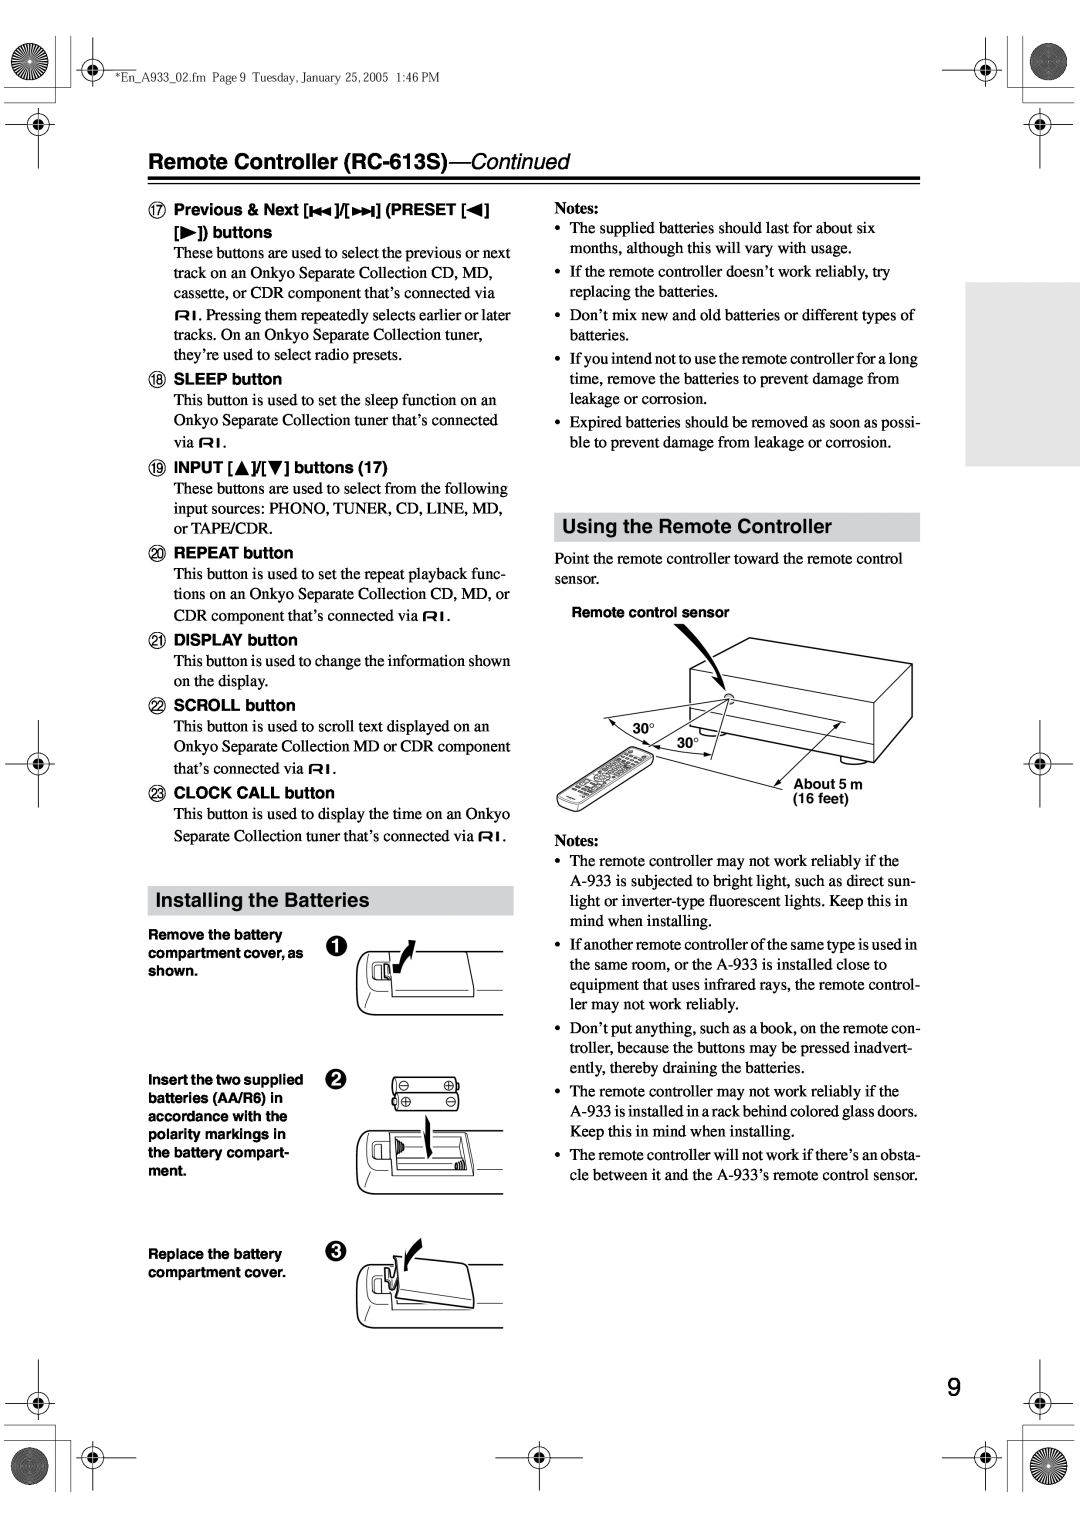 Onkyo A-933 instruction manual Remote Controller RC-613S-Continued, Using the Remote Controller, Installing the Batteries 